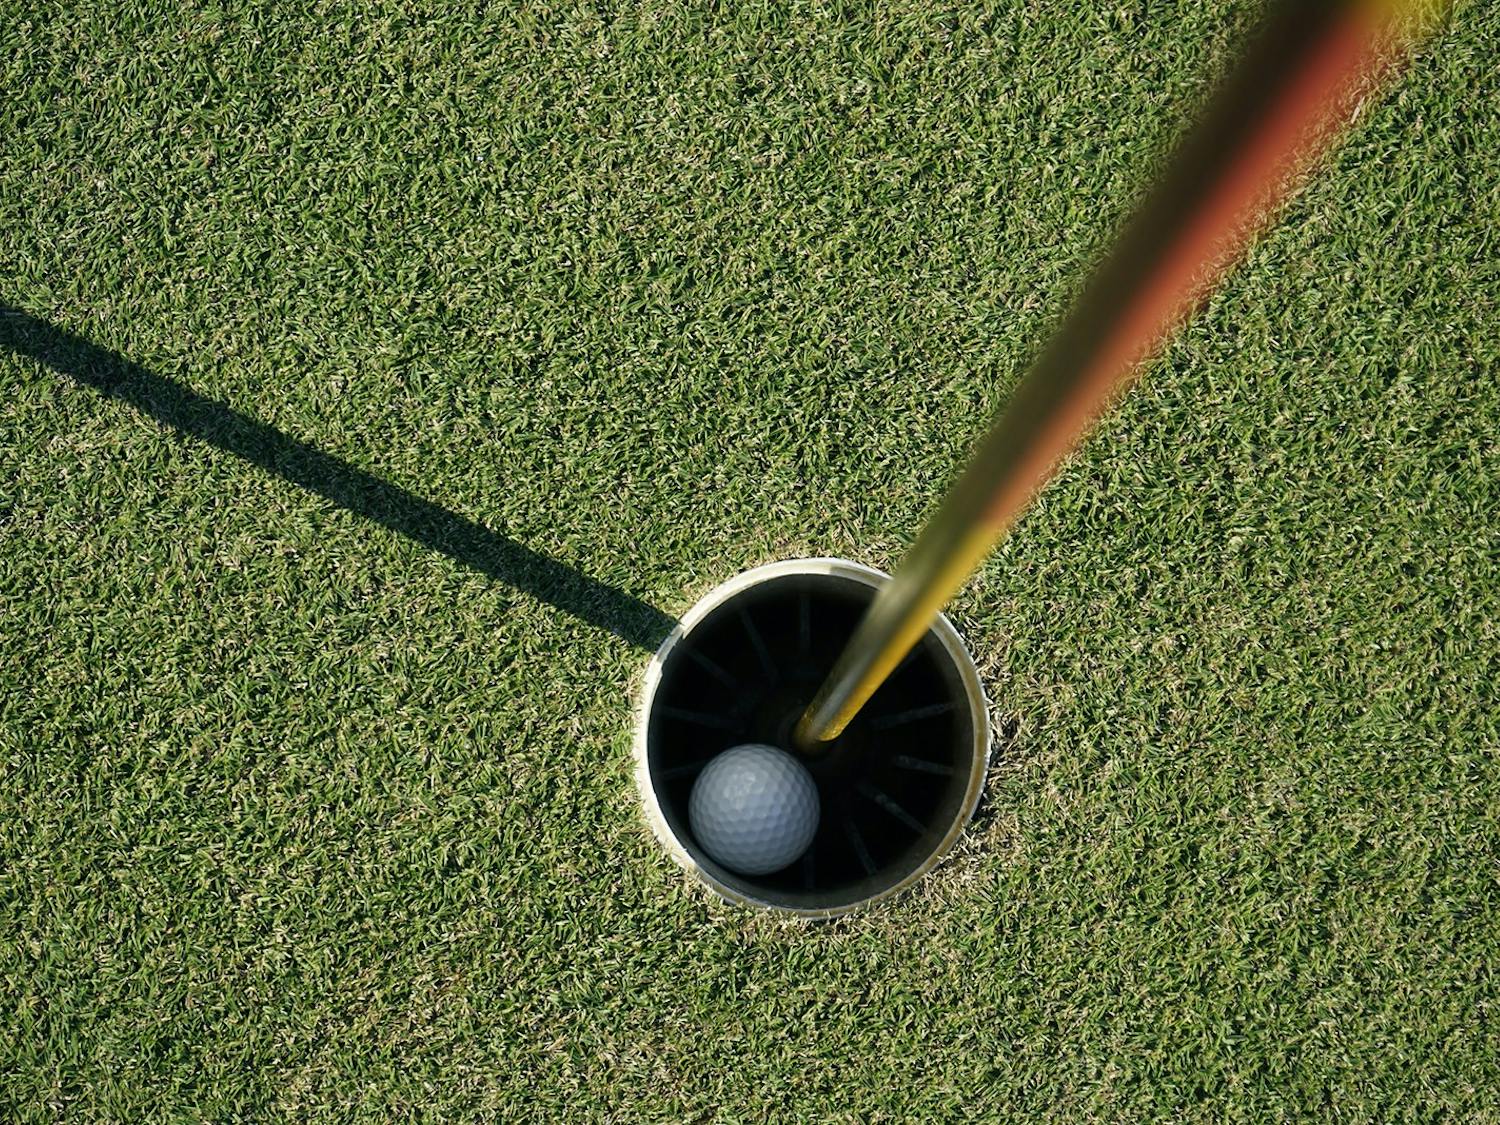 A picture of a golf ball in a hole on a golf course. (Dreamstime/TNS)